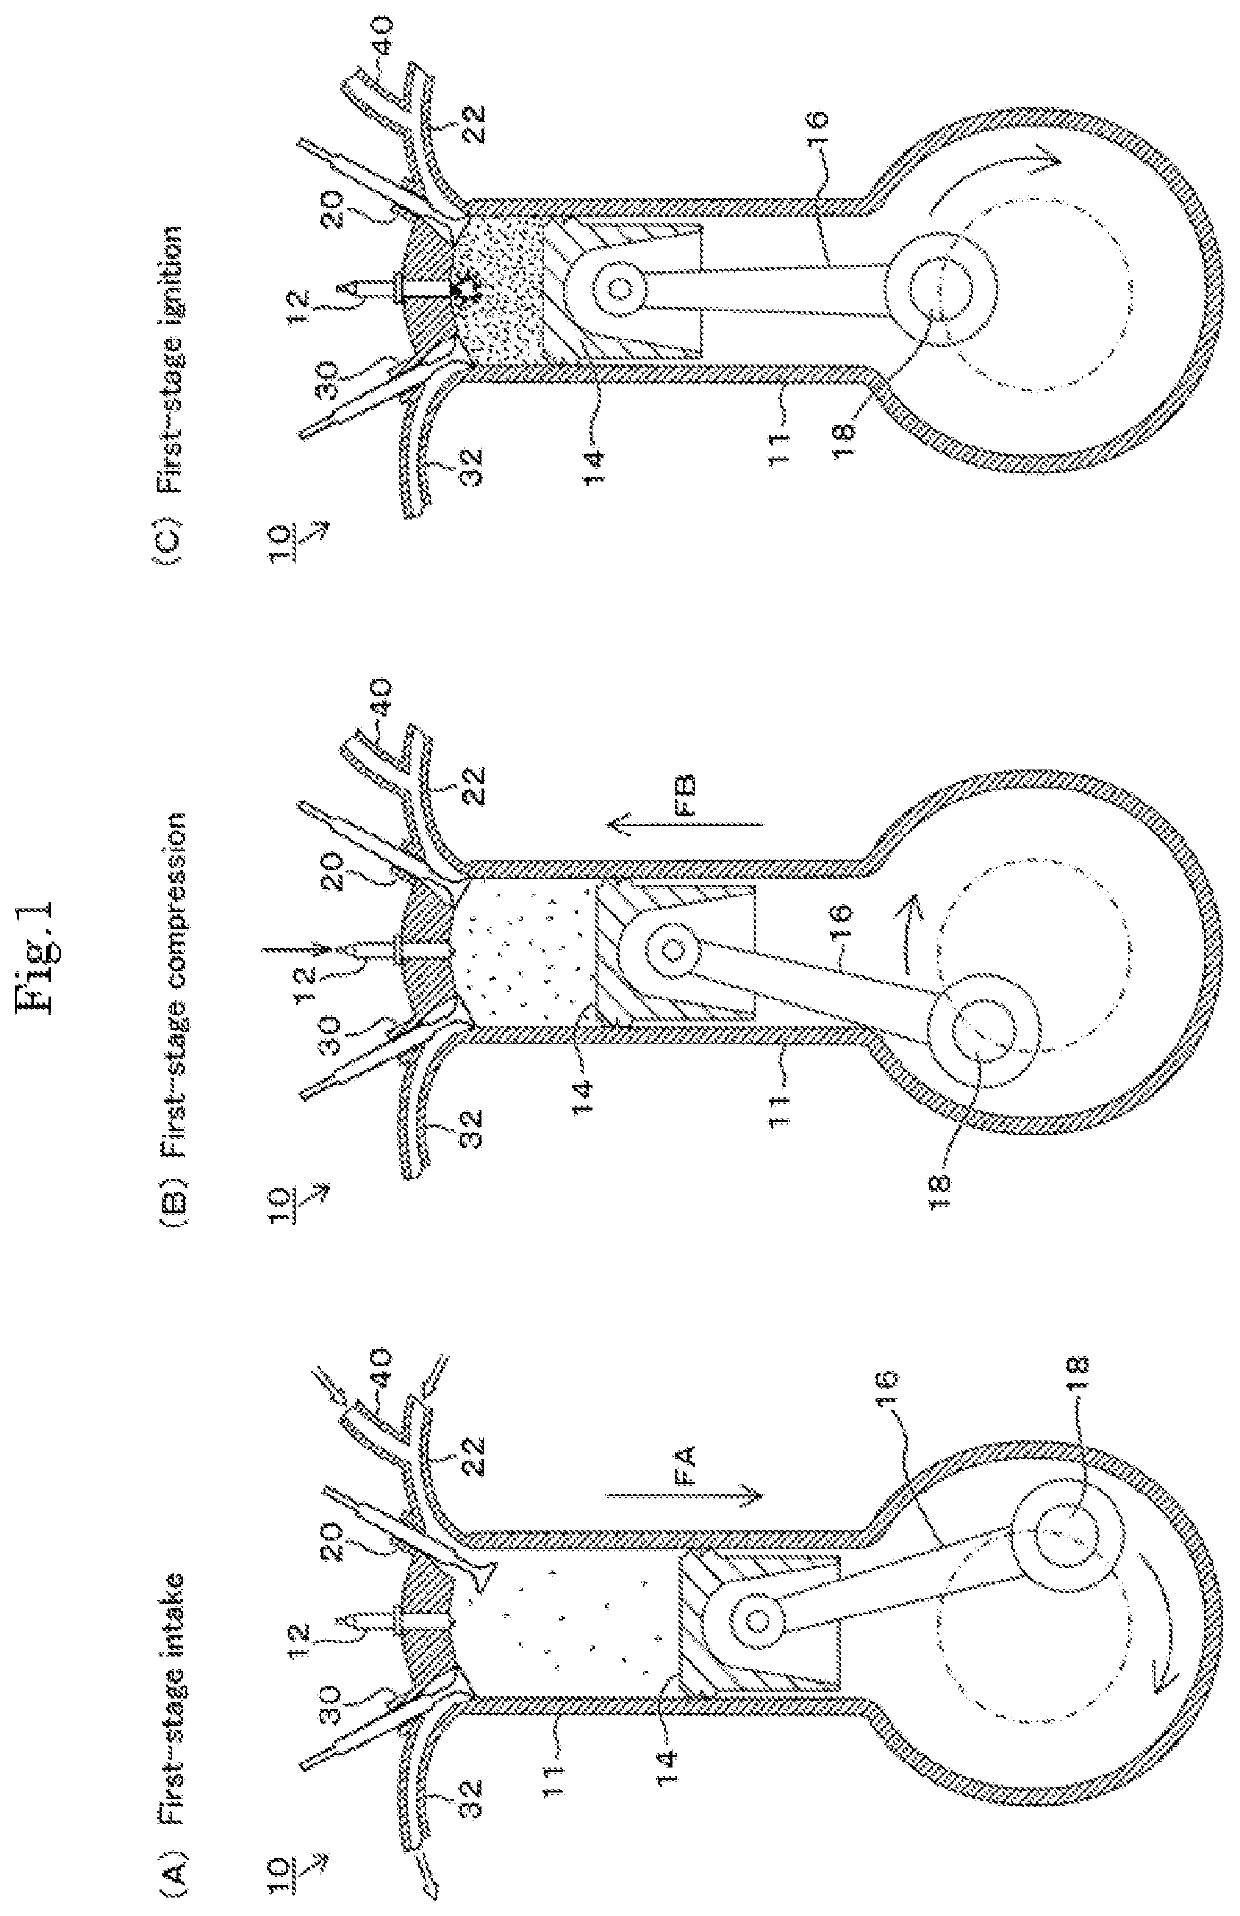 Internal-combustion engine and drive system